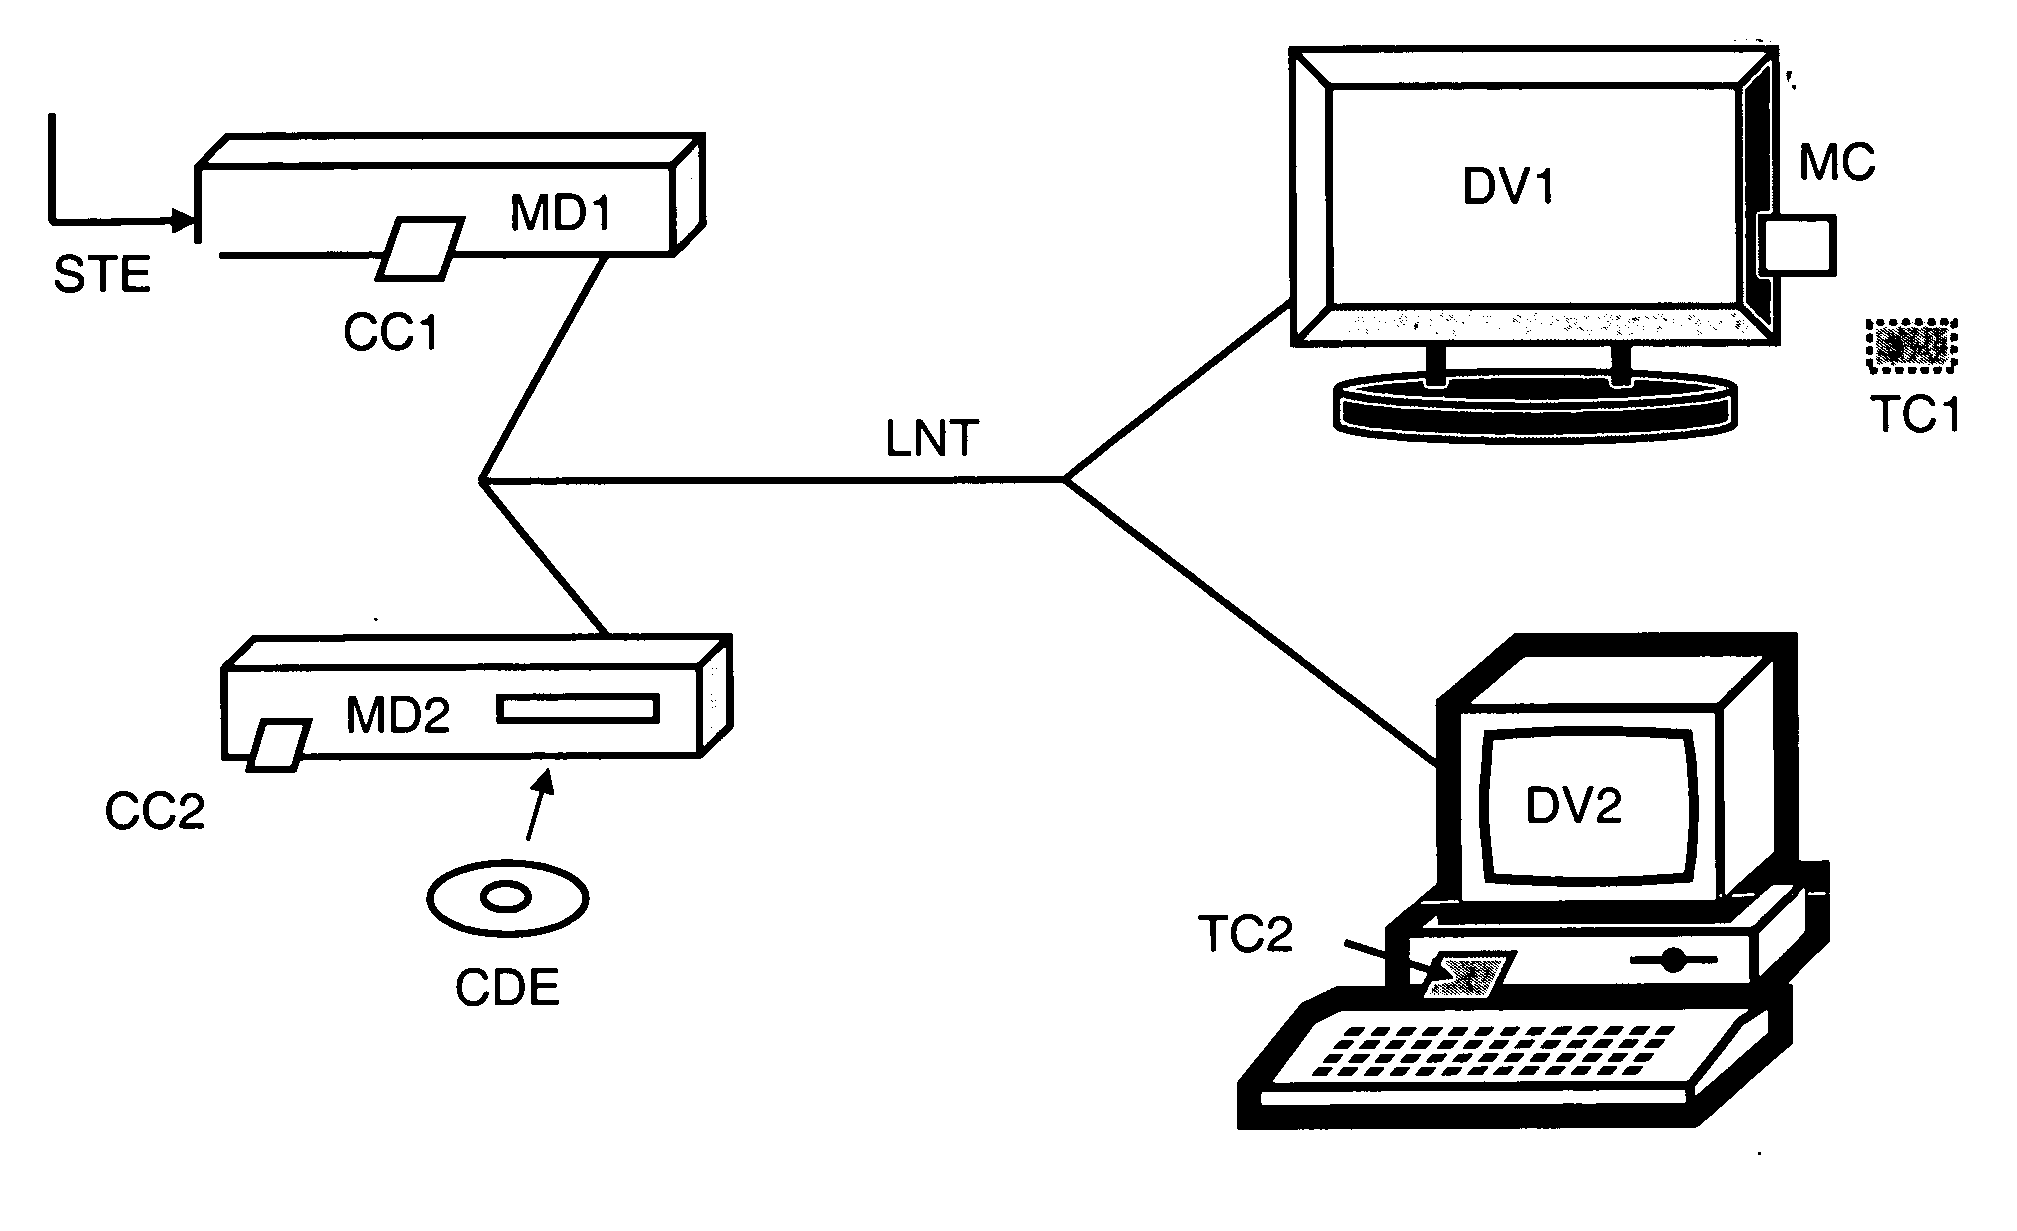 Method for generating and managing a local area network